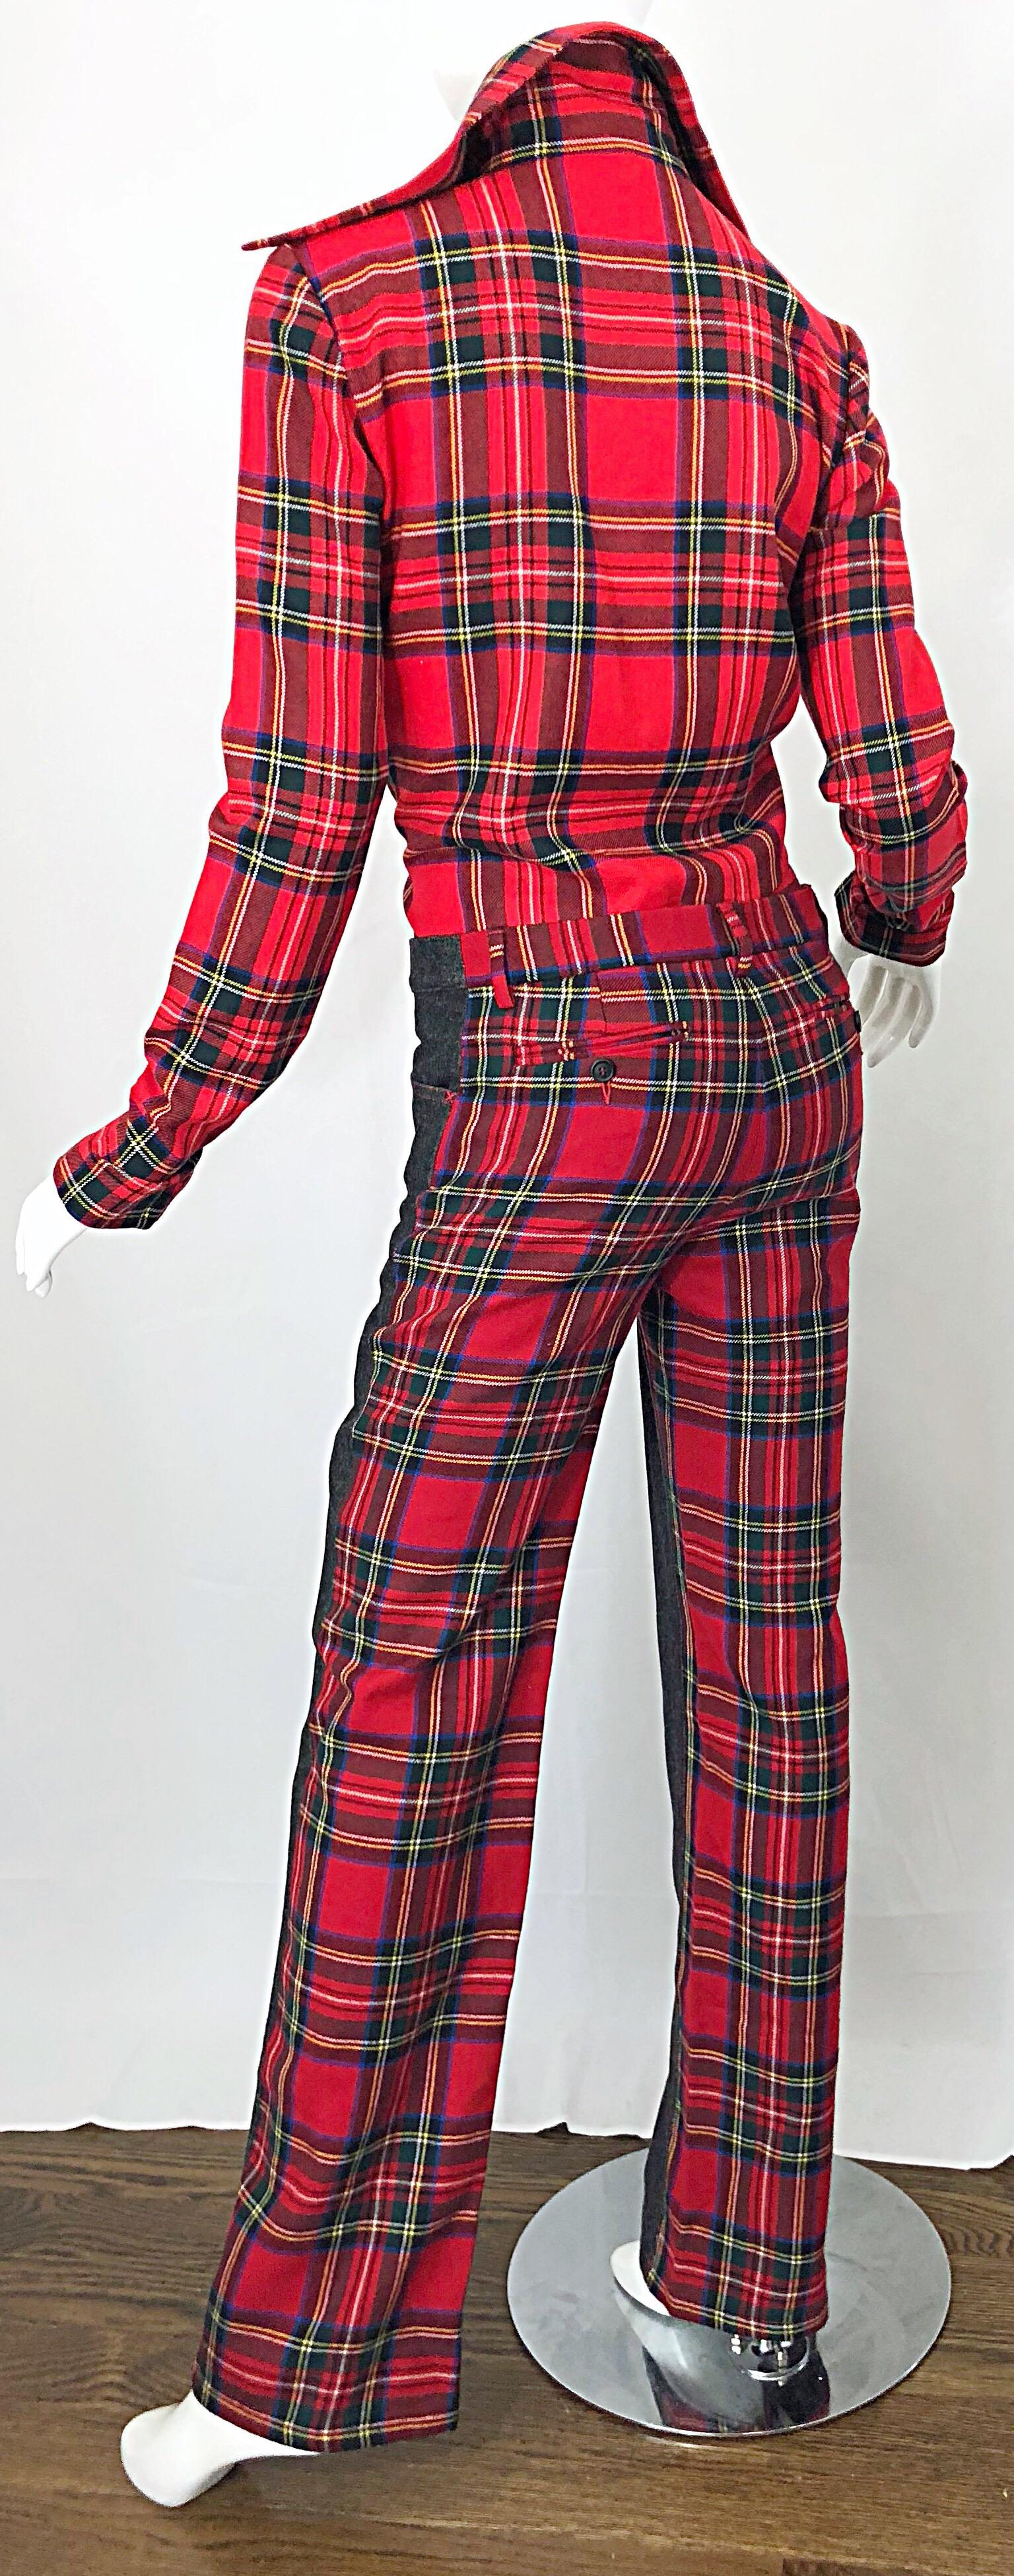 Rare 1990s Dolce & Gabbana Red Tartan Plaid Wool + Denim Flared Jeans and Shirt For Sale 4